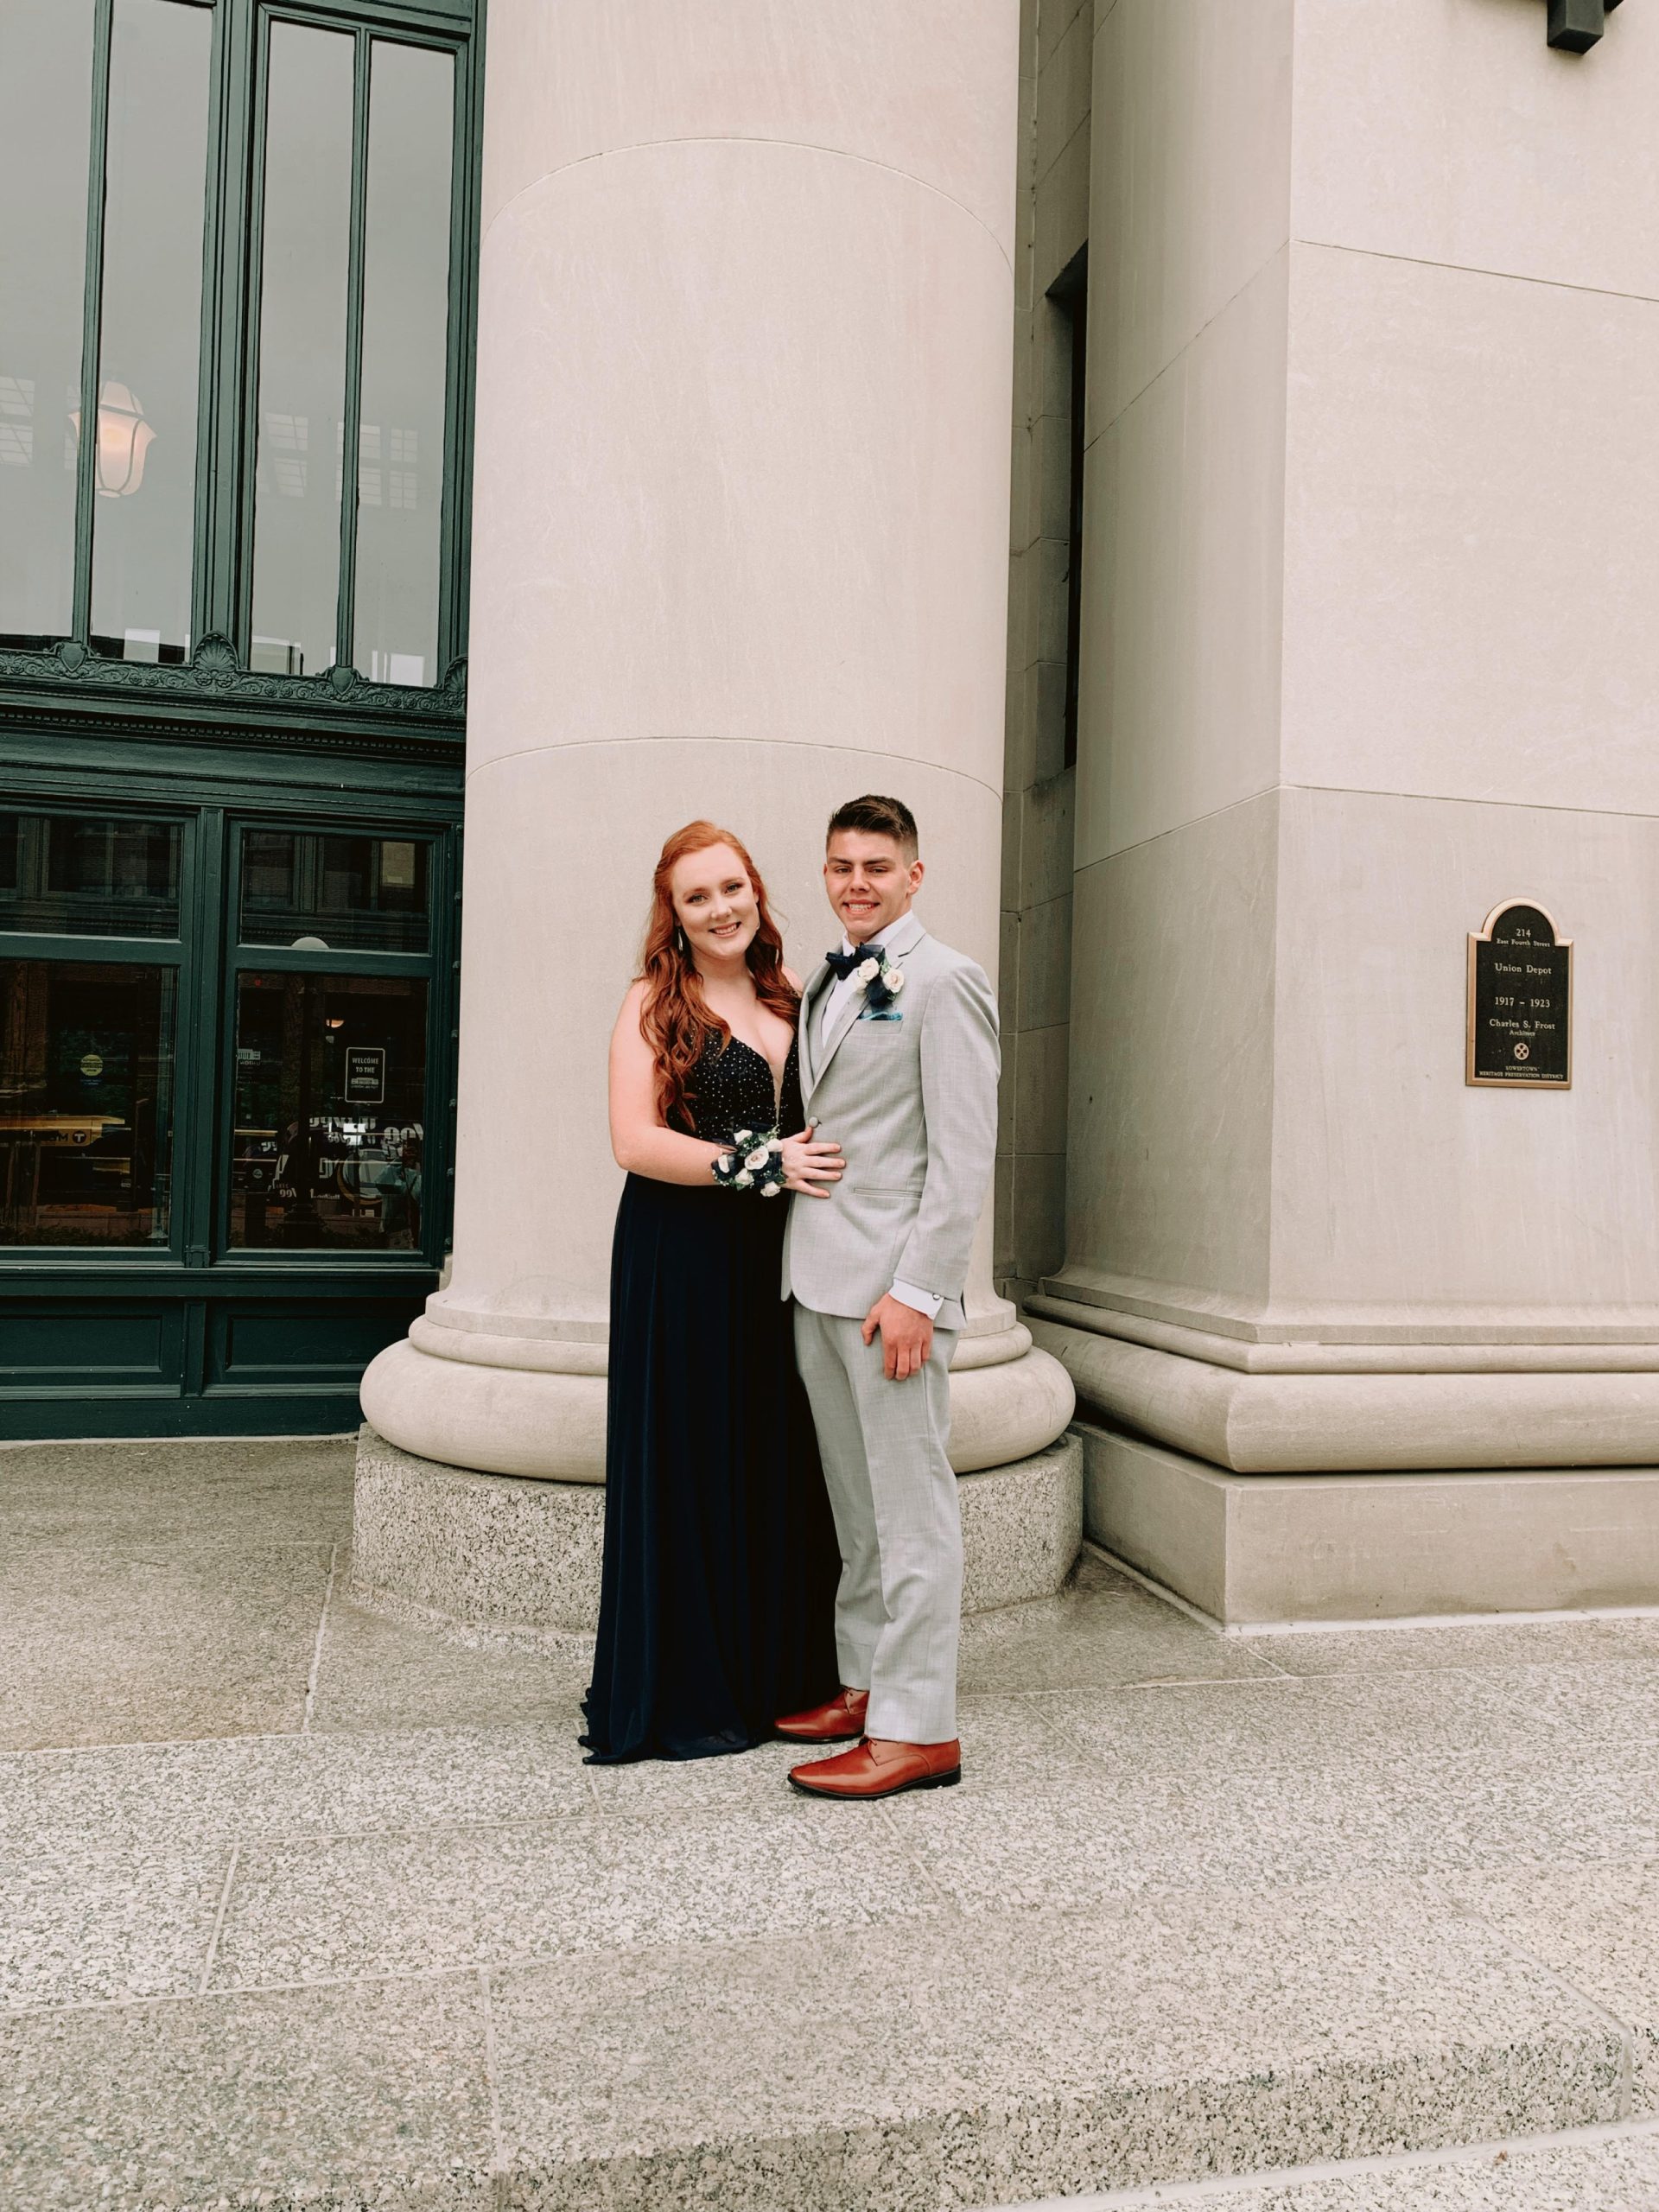 A school dance couple standing in front of the Union Depot head house